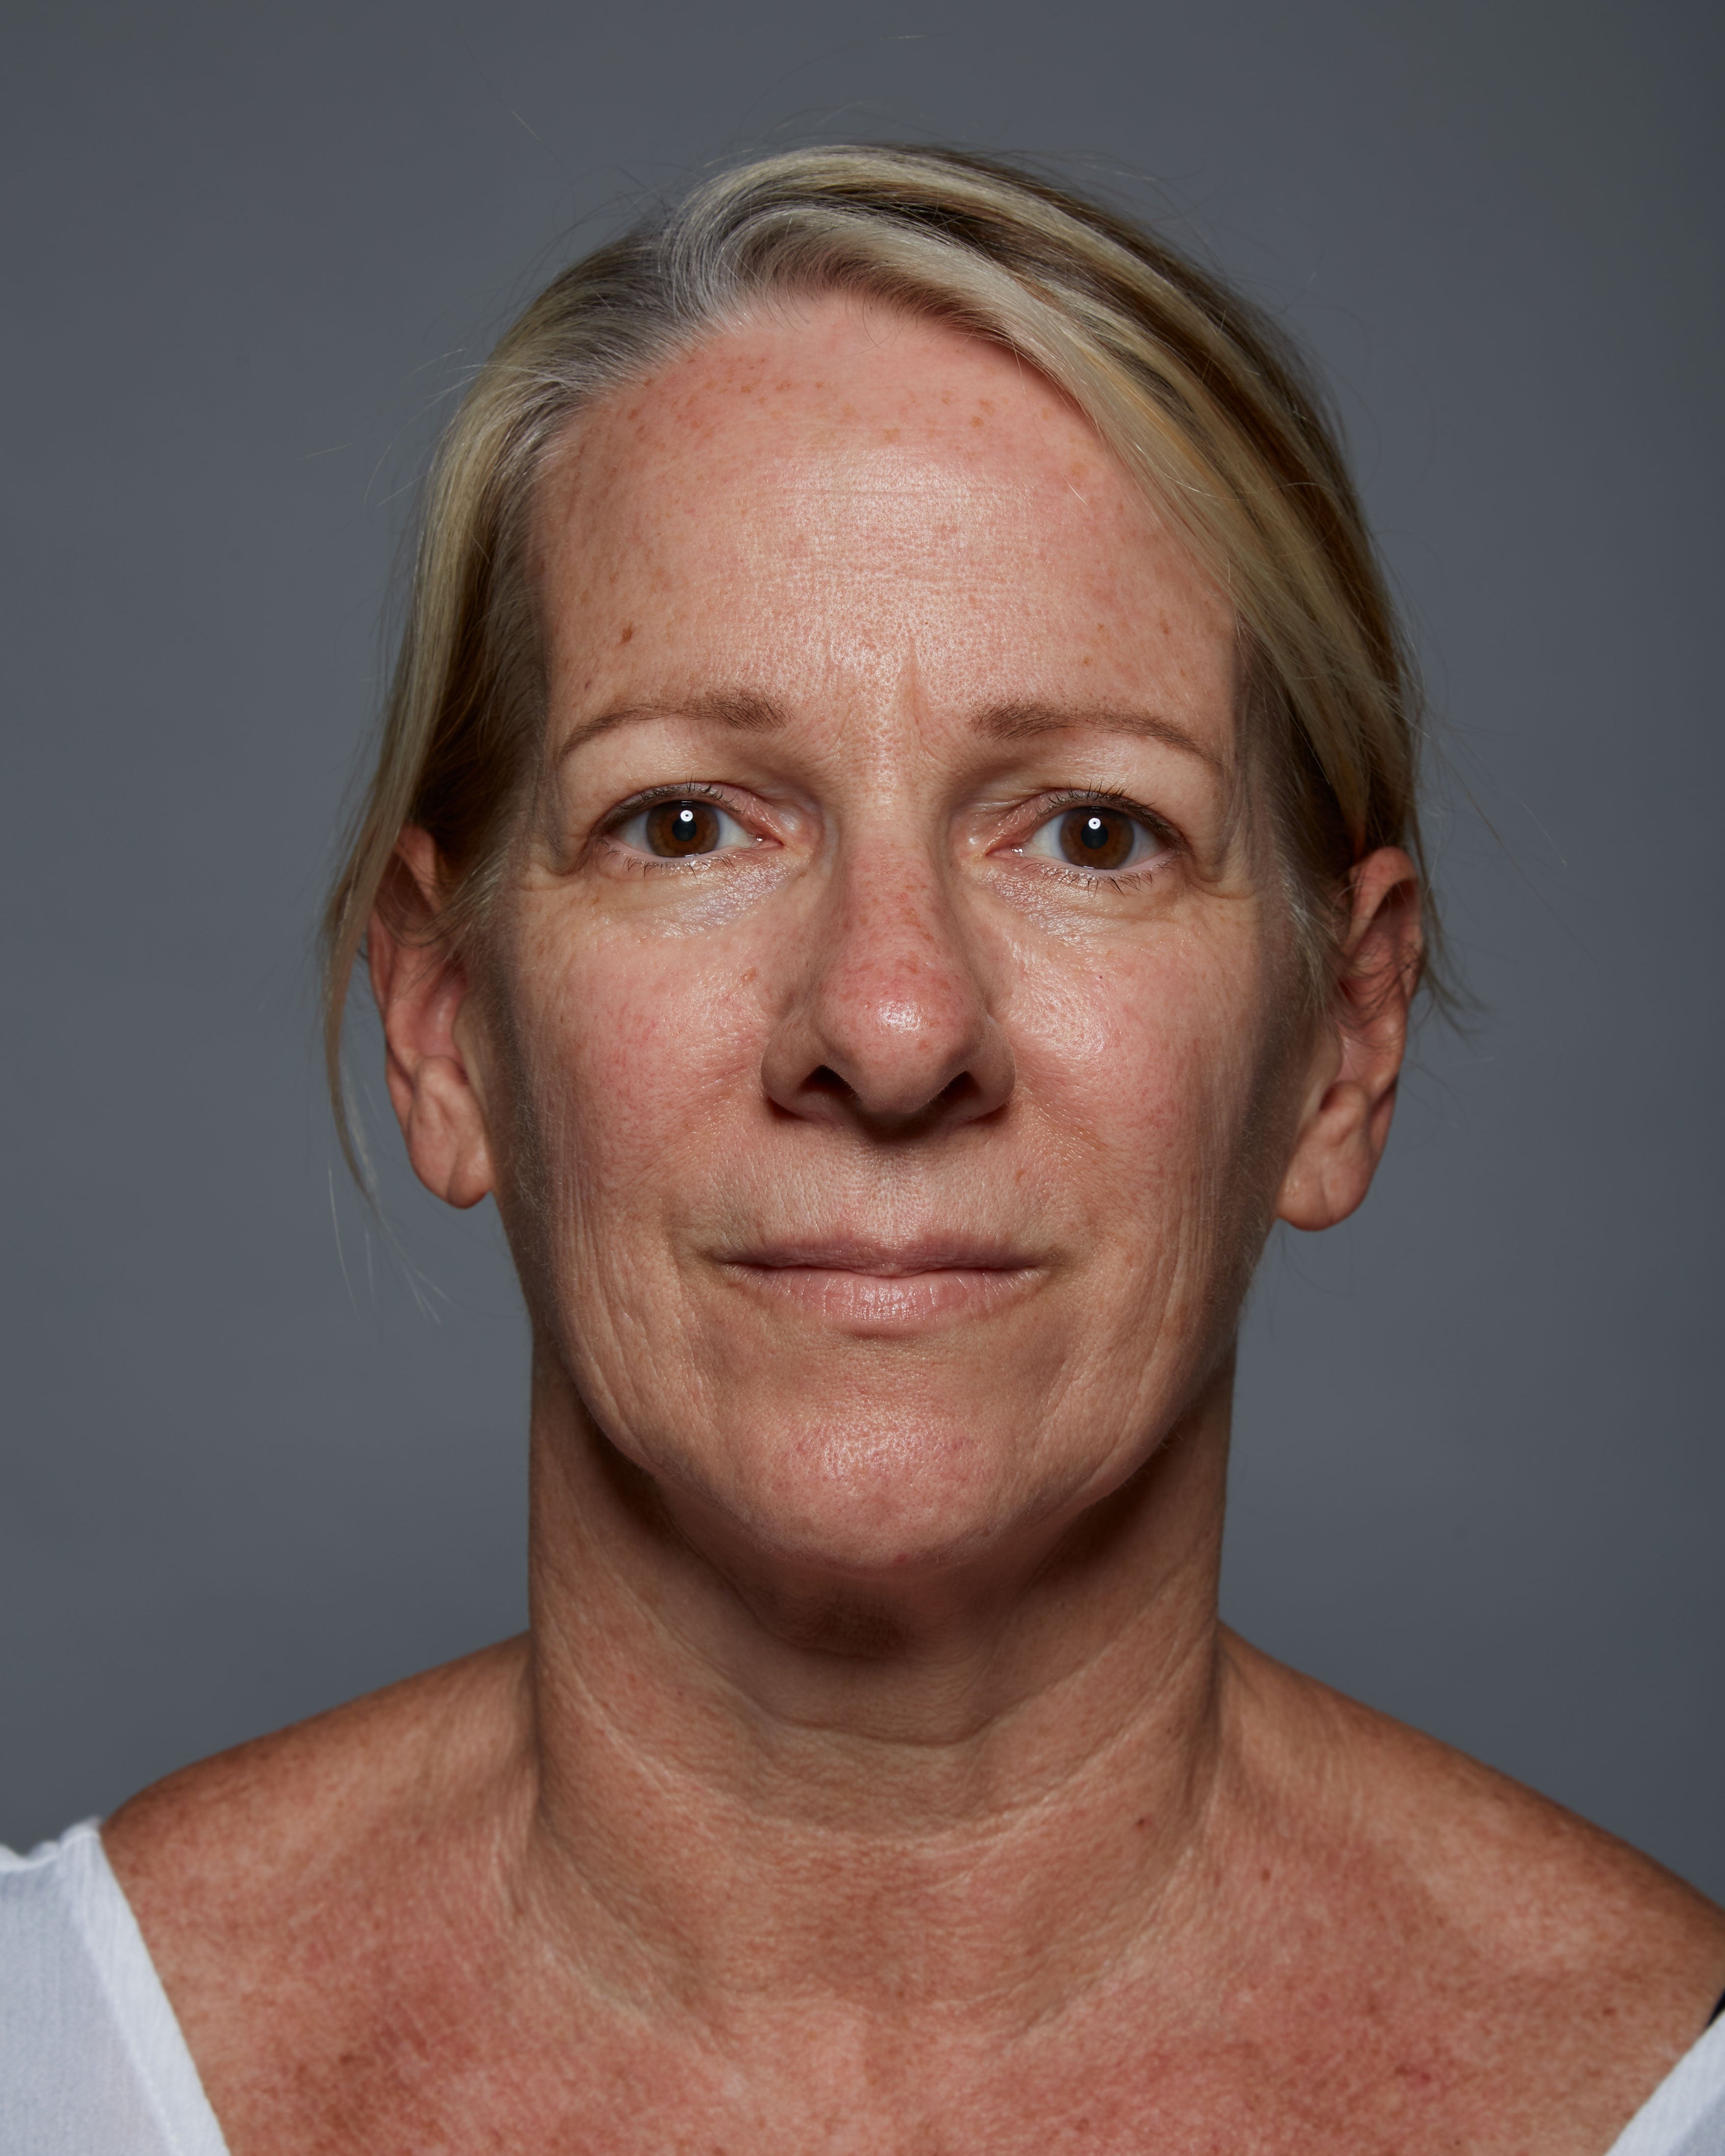 "Before" headshot of a clinical subject who has used Michal Morrison Genesis BSTEM6 Molecular Serum, showing a white woman with blonde hair smiling at camera.